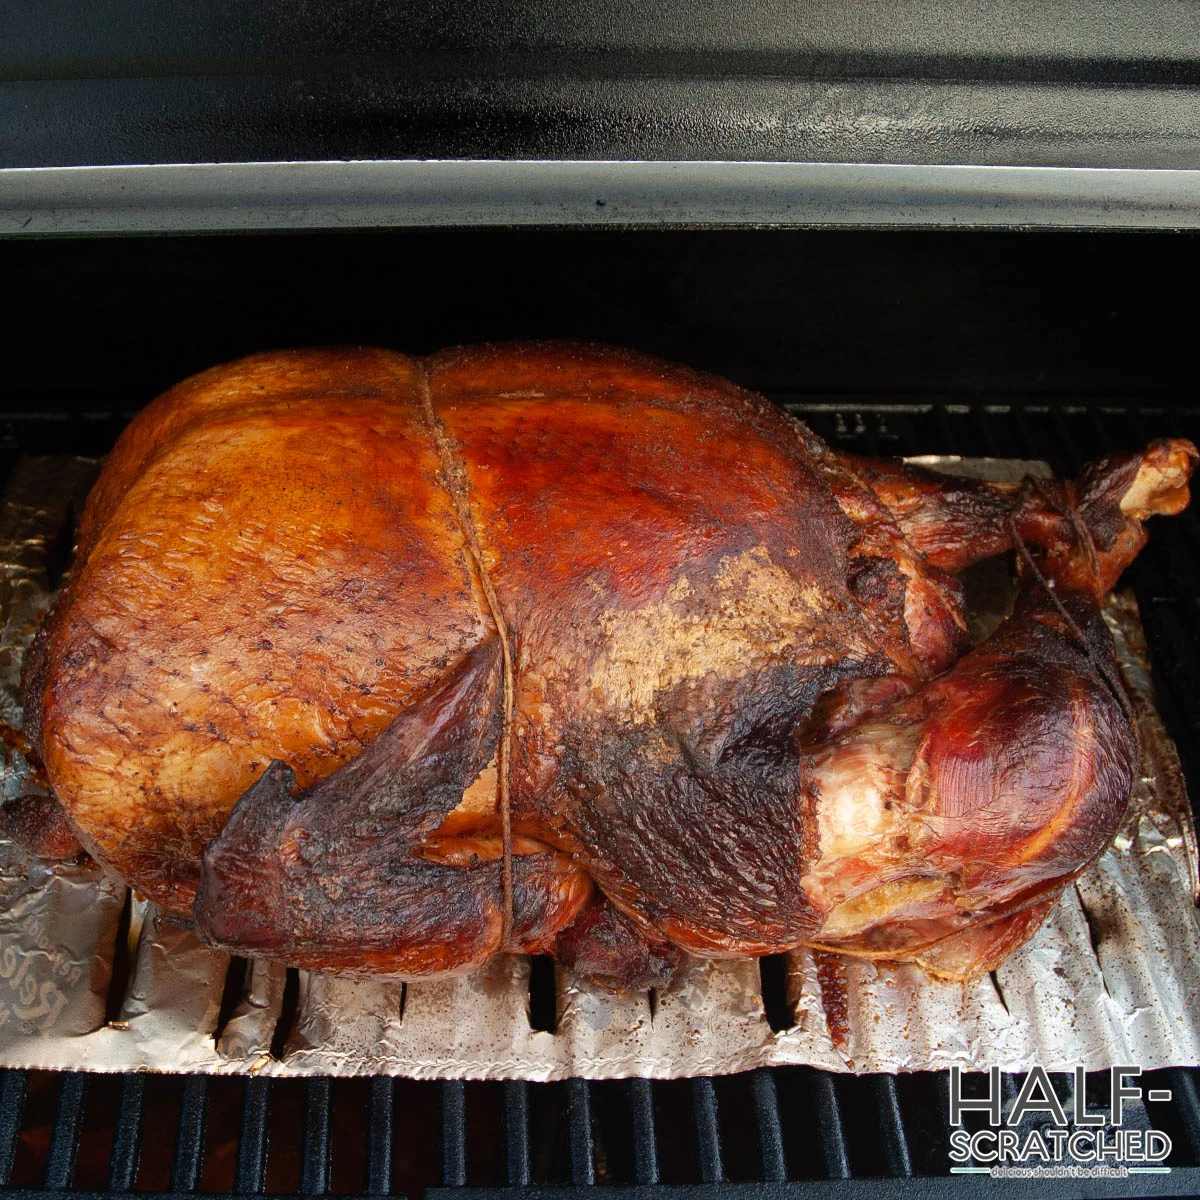 Smoked turkey resting on foil